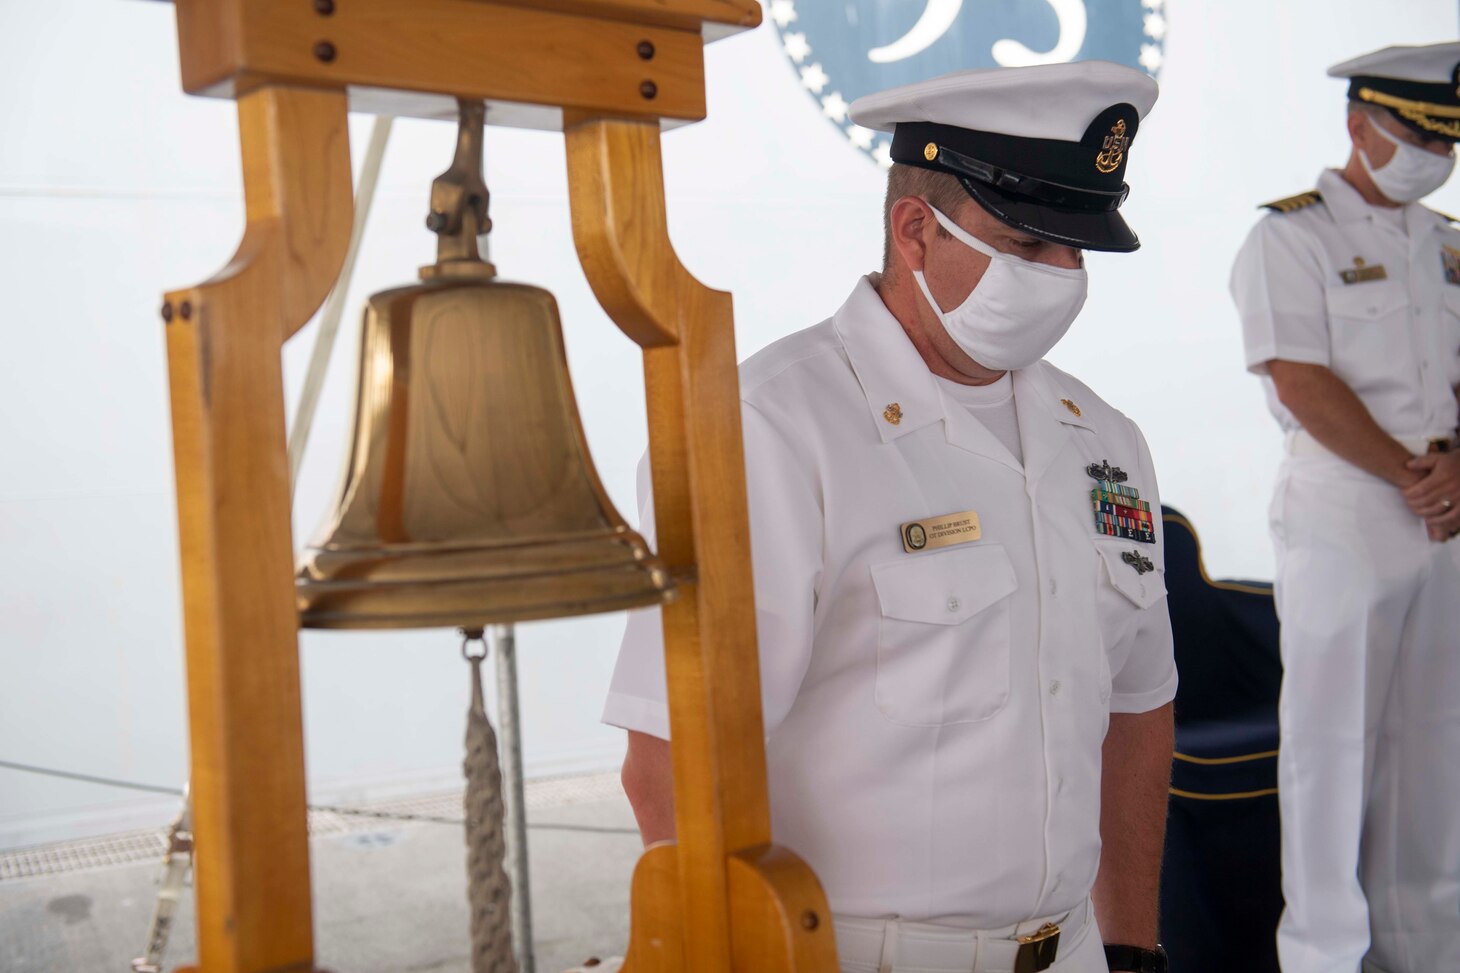 9/11 remembrance ceremony on the flight deck of USS Somerset (LPD 25).